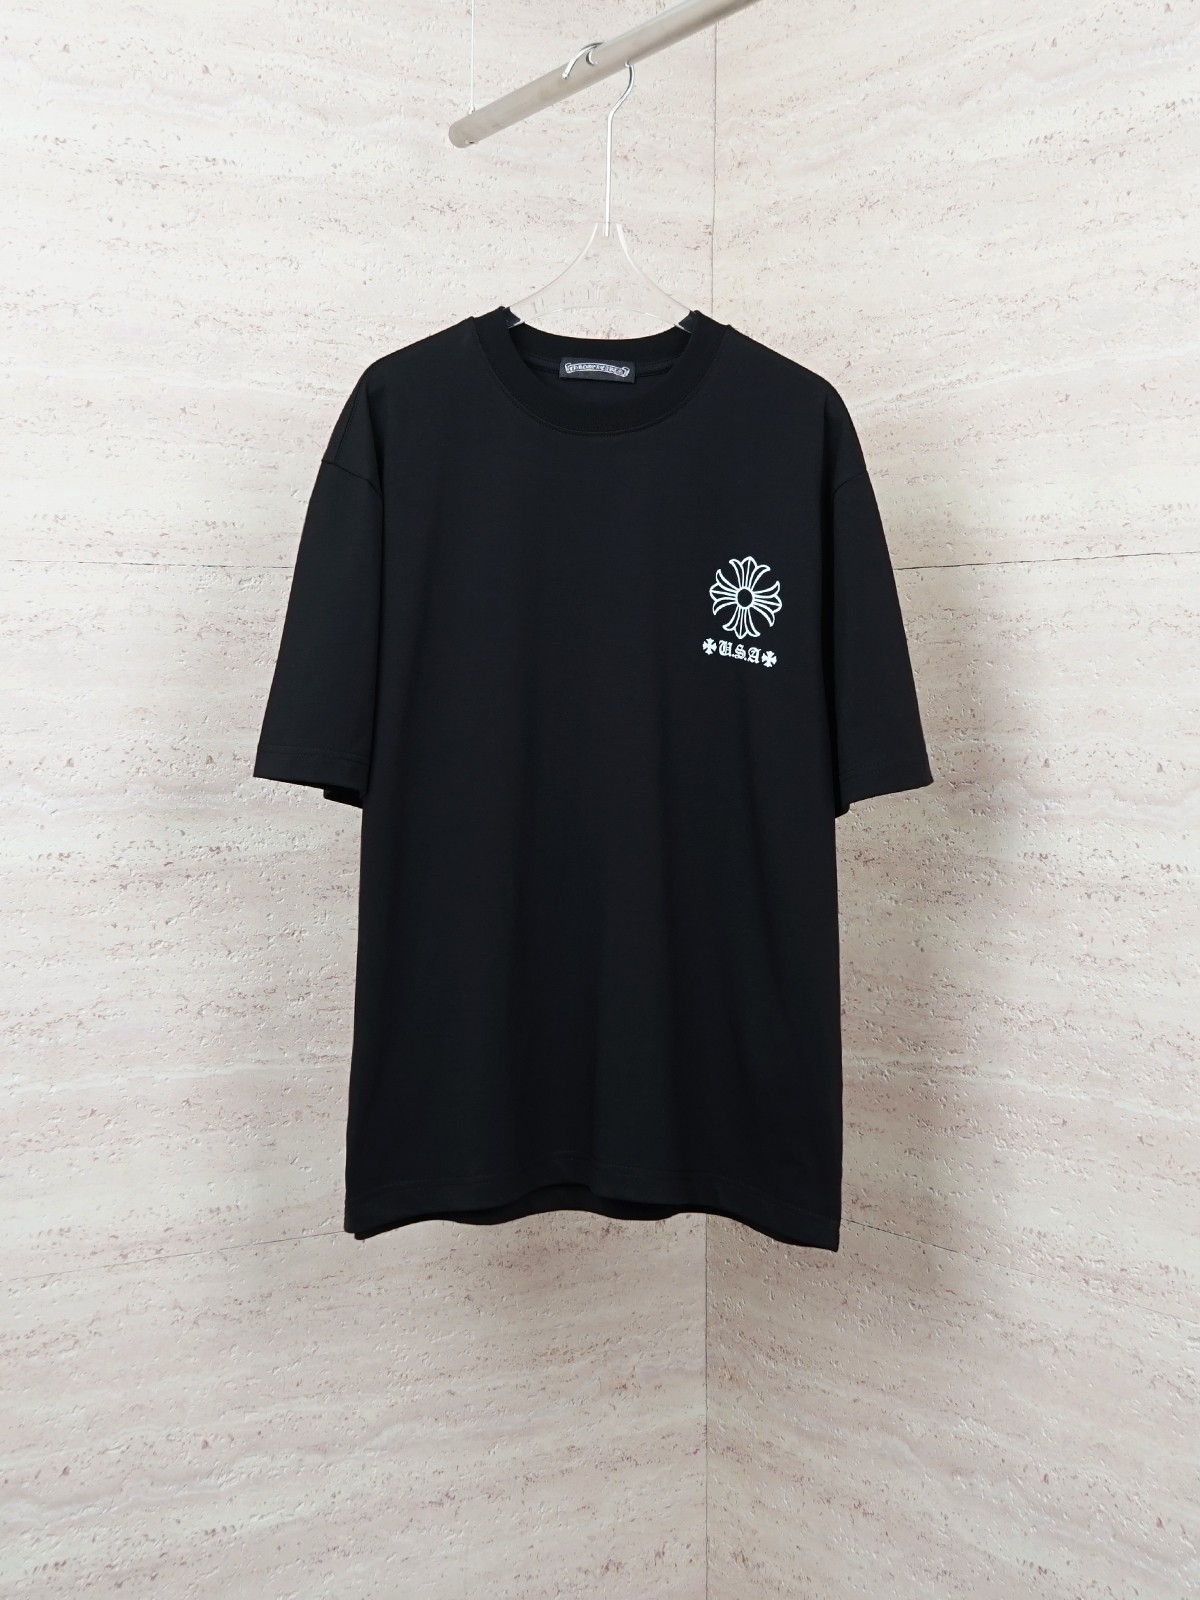 Chrome Hearts Clothing T-Shirt Printing Combed Cotton Spring/Summer Collection Short Sleeve